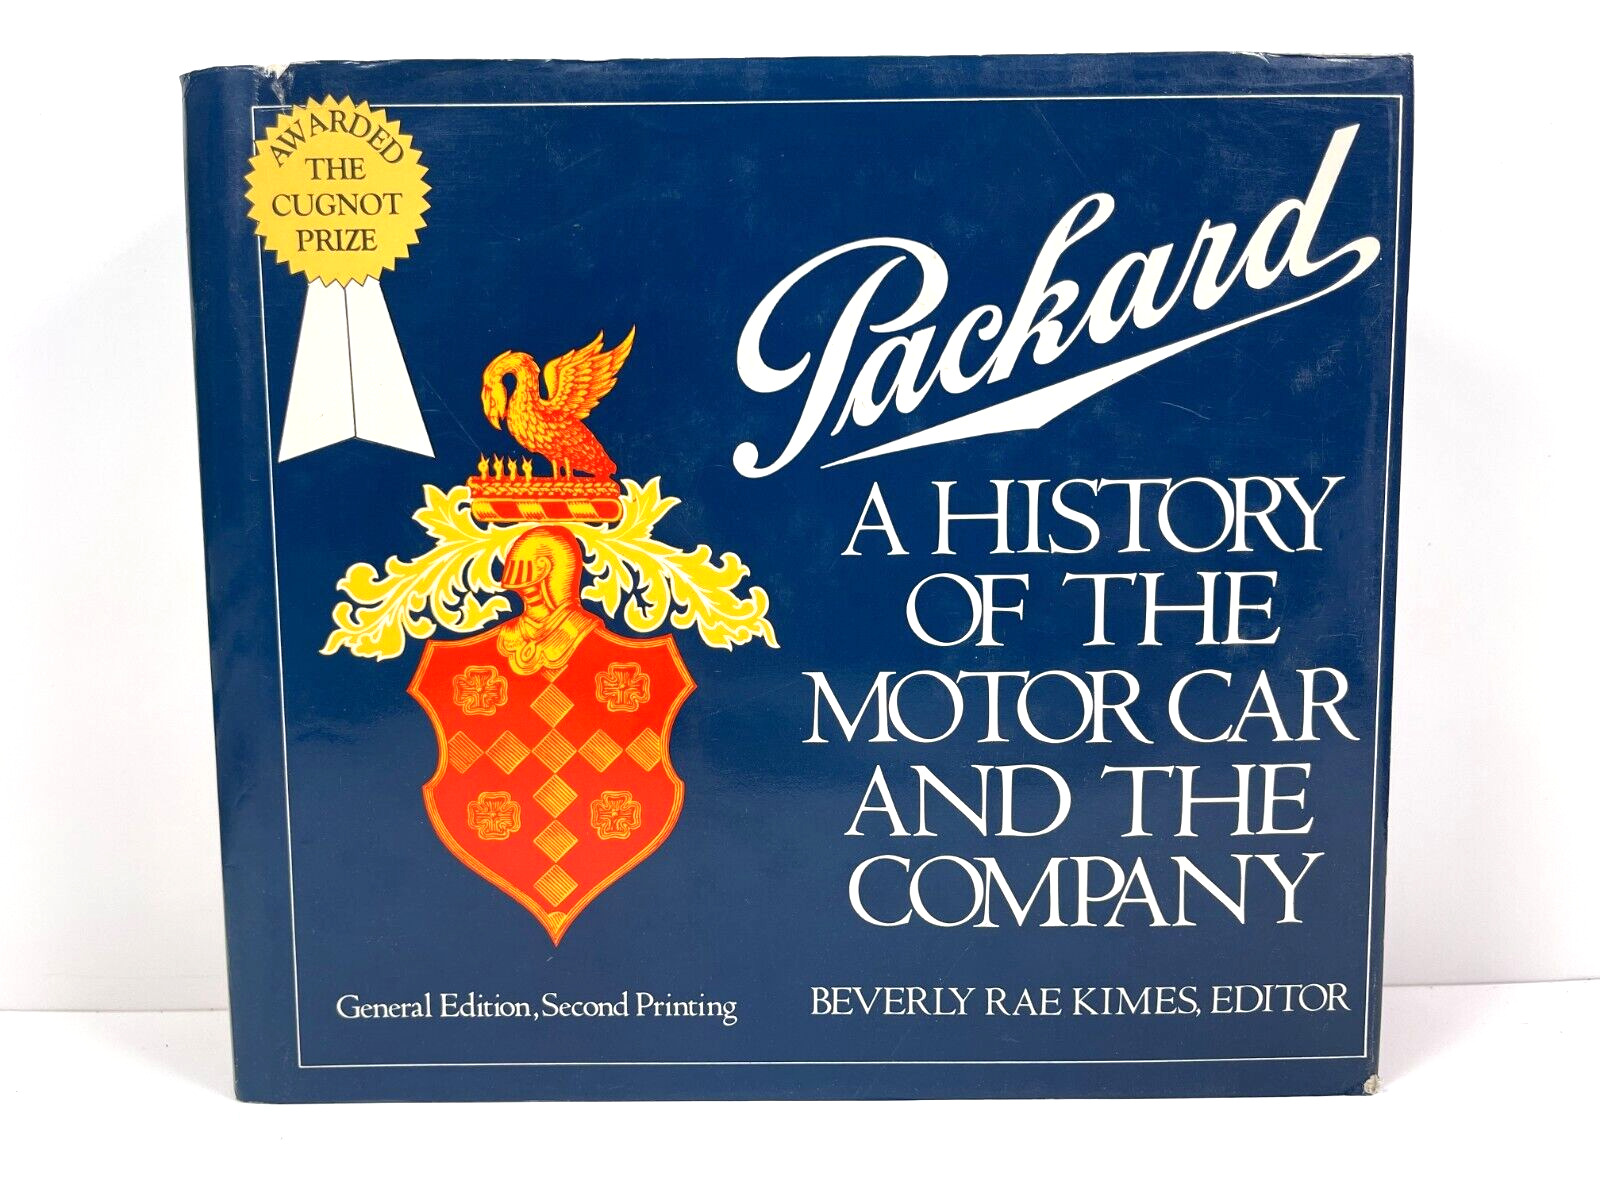 Packard : A History of the Motor Car and the Company by Beverly Rae Kimes